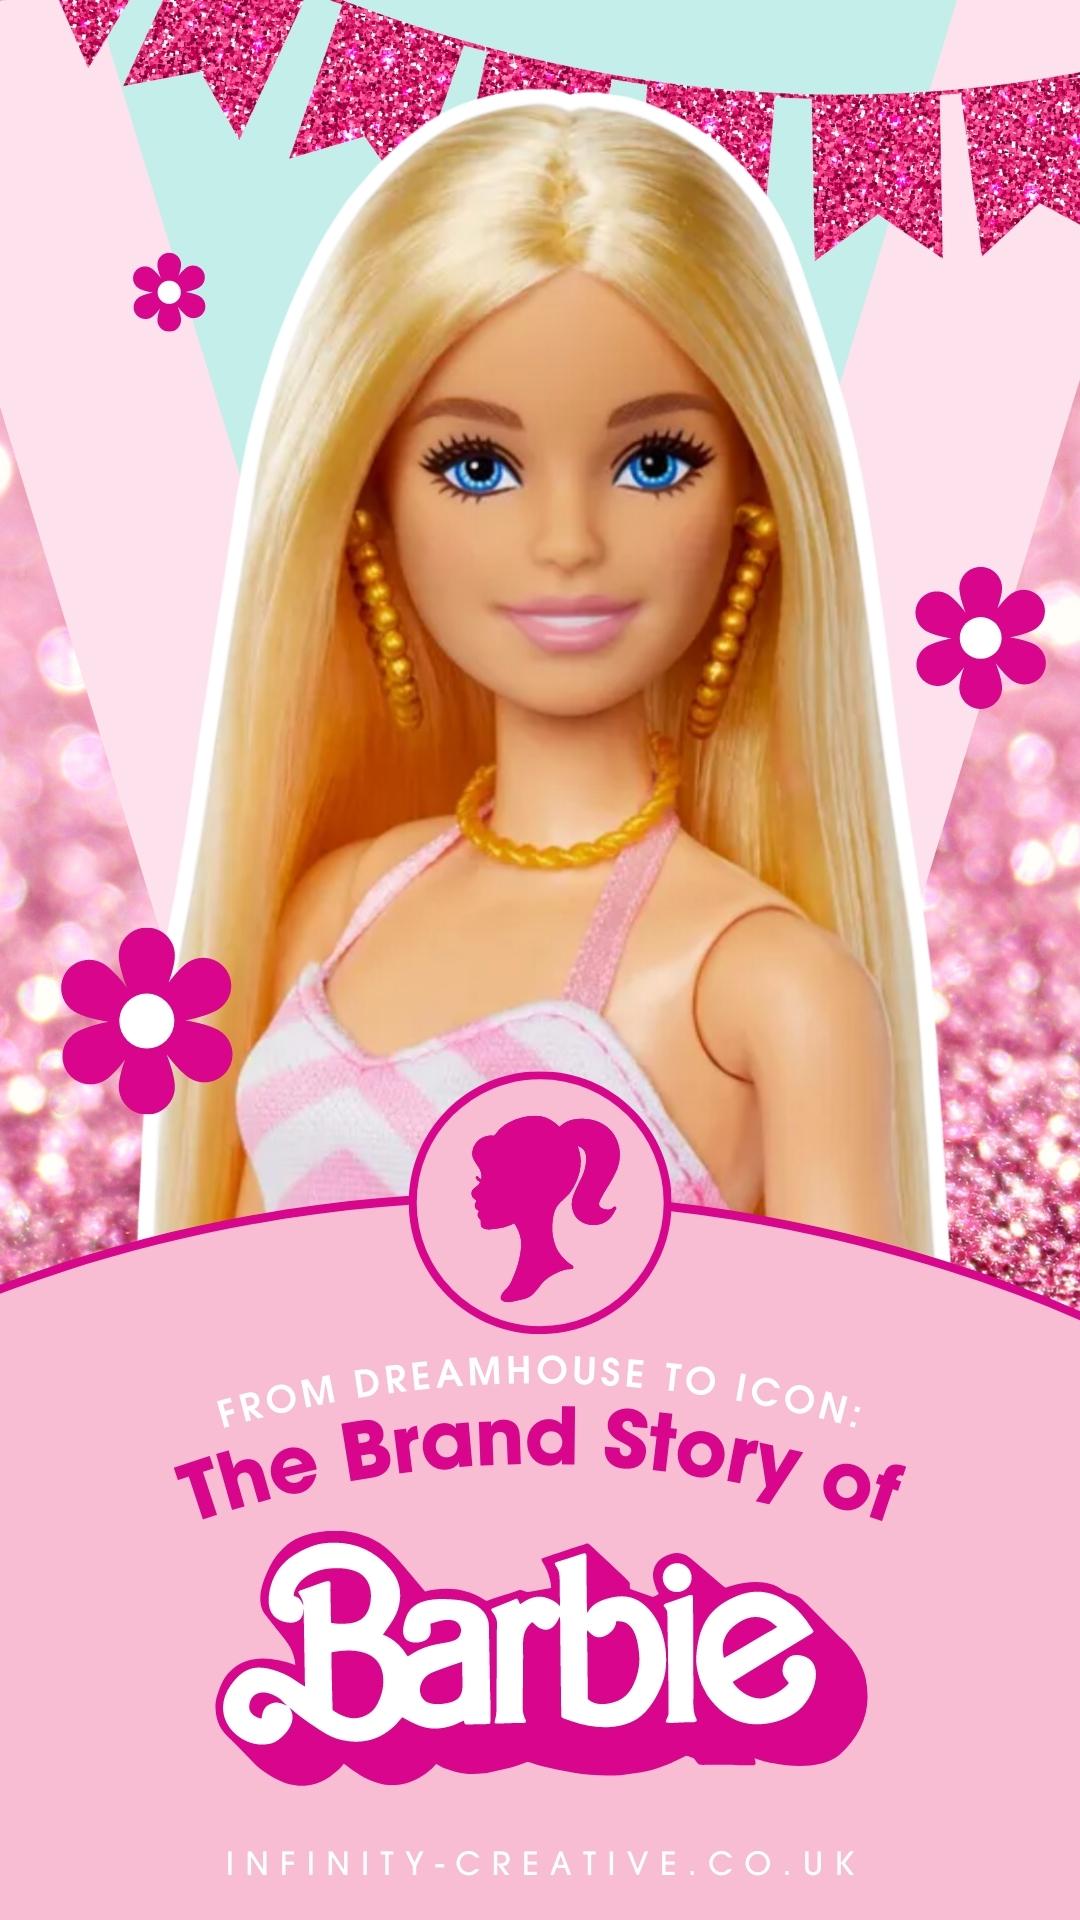 From Dreamhouse to Icon: The Brand Story of Barbie